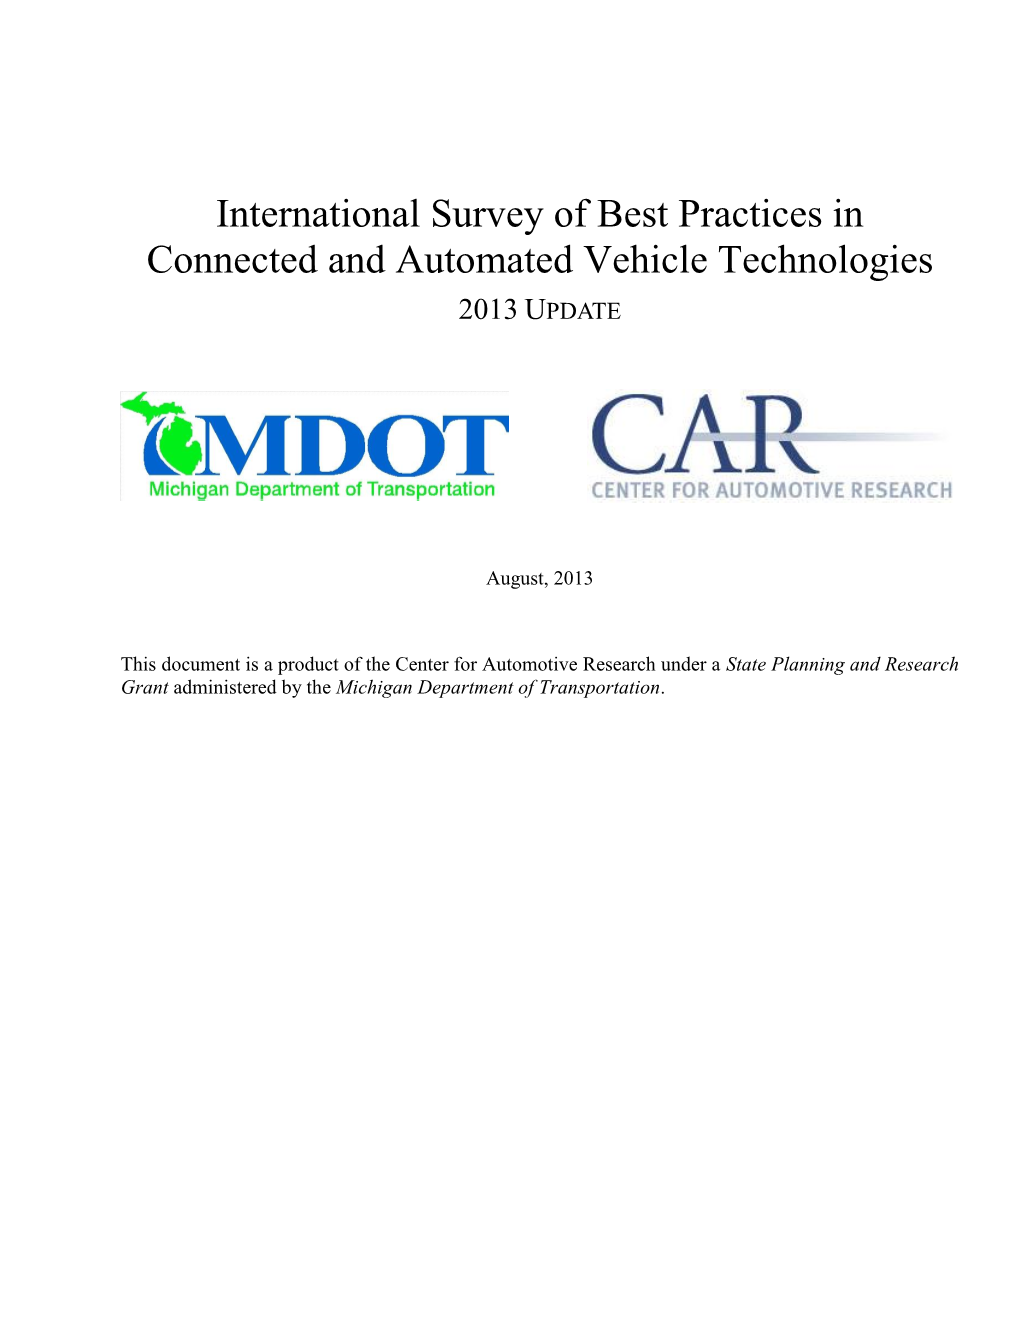 International Survey of Best Practices in Connected and Automated Vehicle Technologies 2013 UPDATE